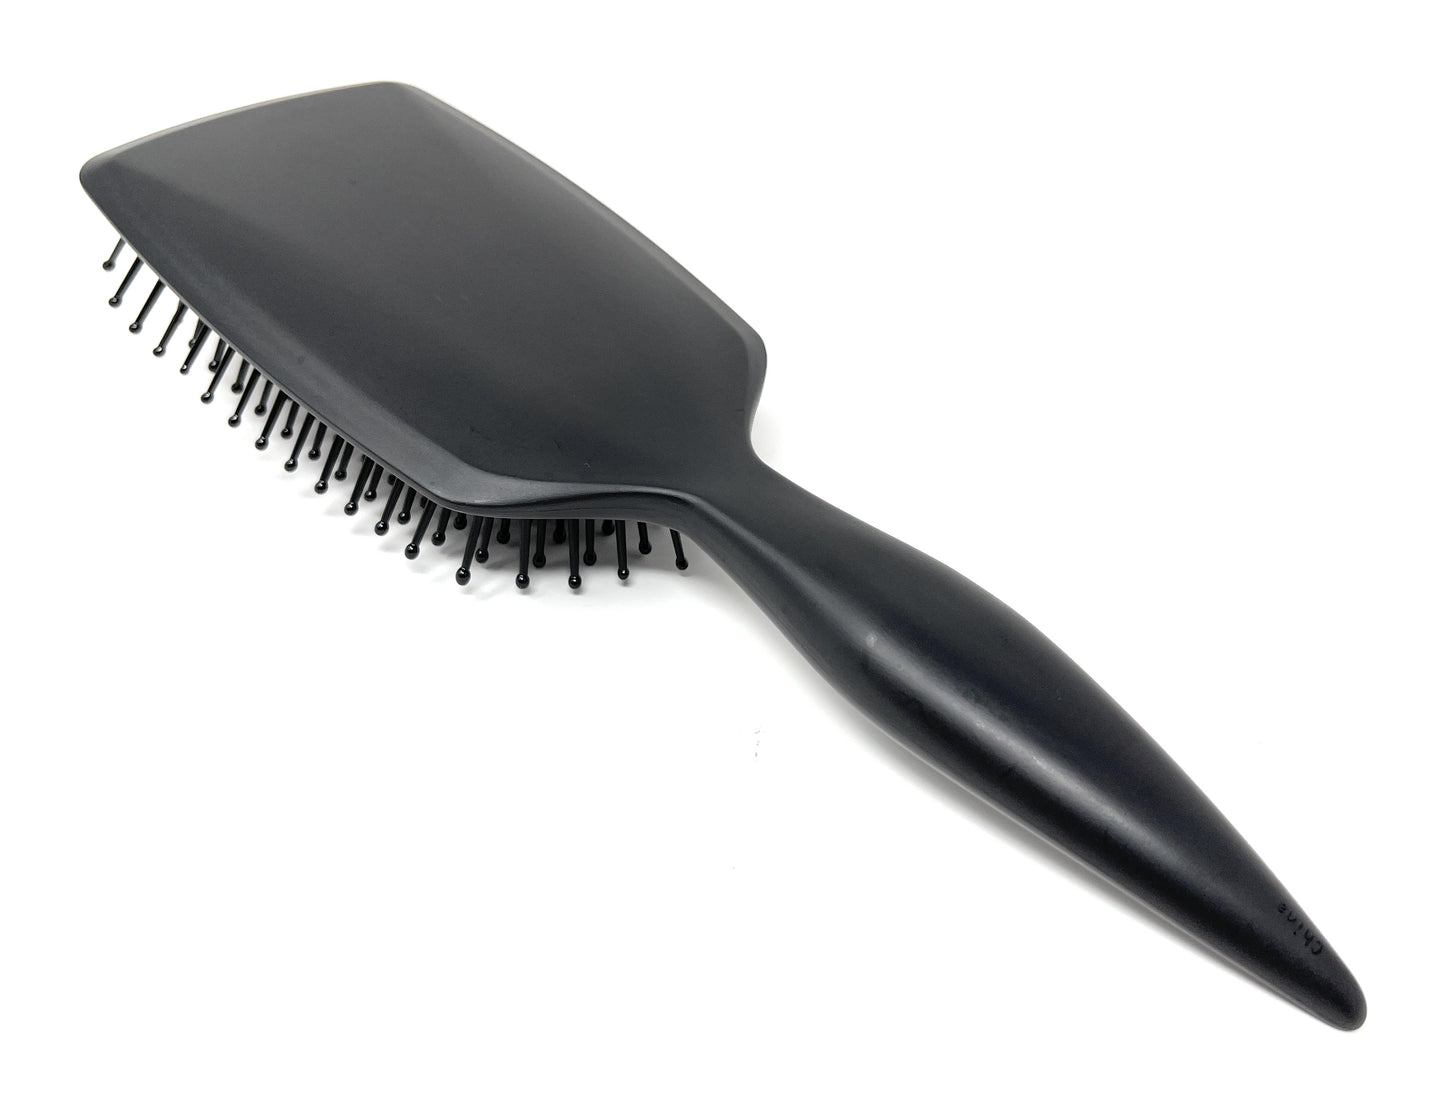 Cricket Carbon Large Wide Paddle Hair Brush for Blow Drying and Styling Ceramic, Tourmaline Ion Bristle Anti-Static Hairbrush